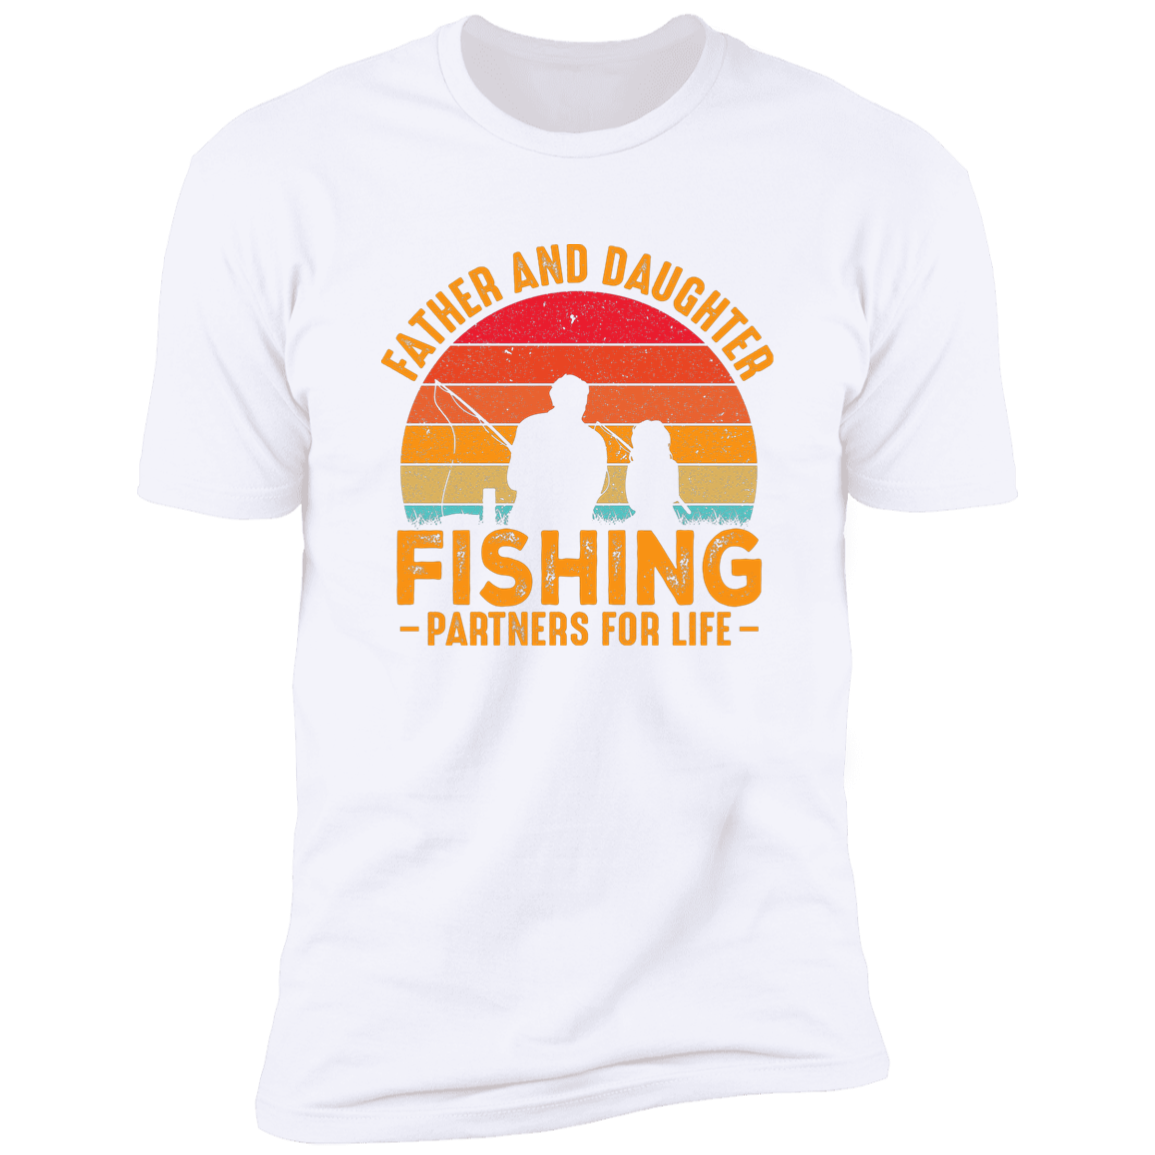 Father and Daughter Fishing 2 | Z61x Premium Short Sleeve Tee (Closeout)